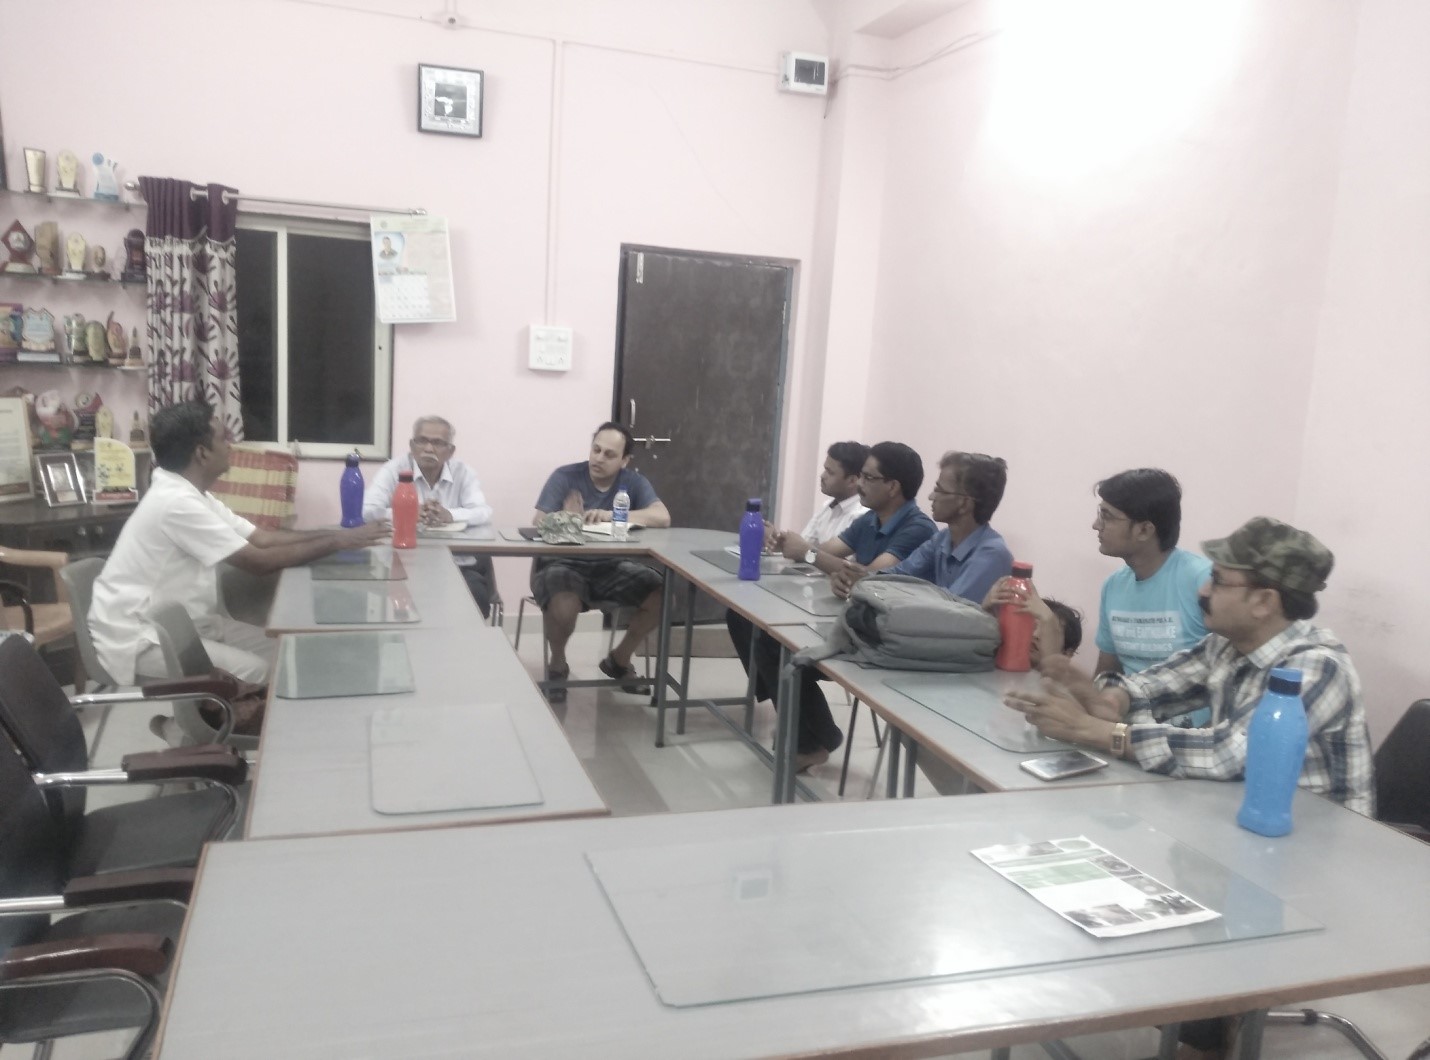 Dr. Hemant Joshi and Pramod Dalal discussing Project Udaan with teachers